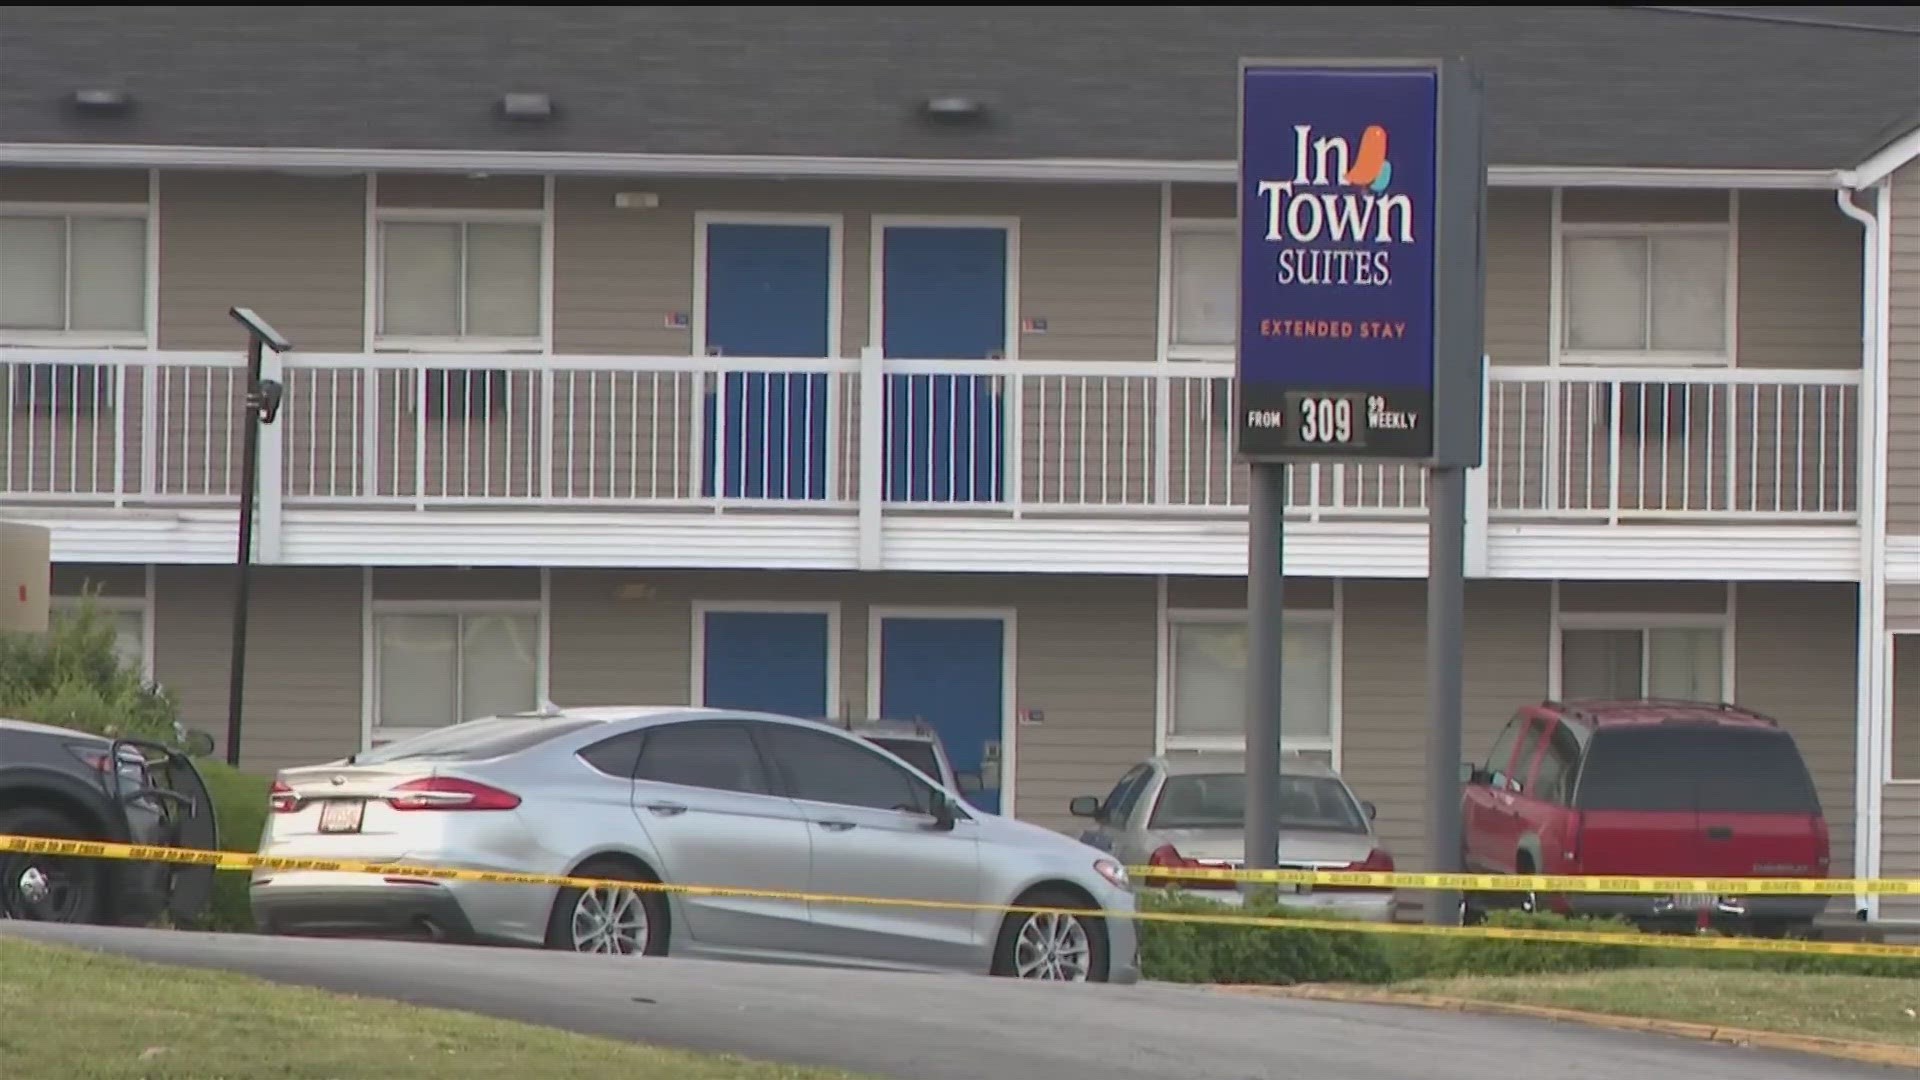 11Alive had a crew at the scene, who saw several patrol cars responding in the area of an In Town Suites Extended Stay along Jimmy Carter Boulevard.